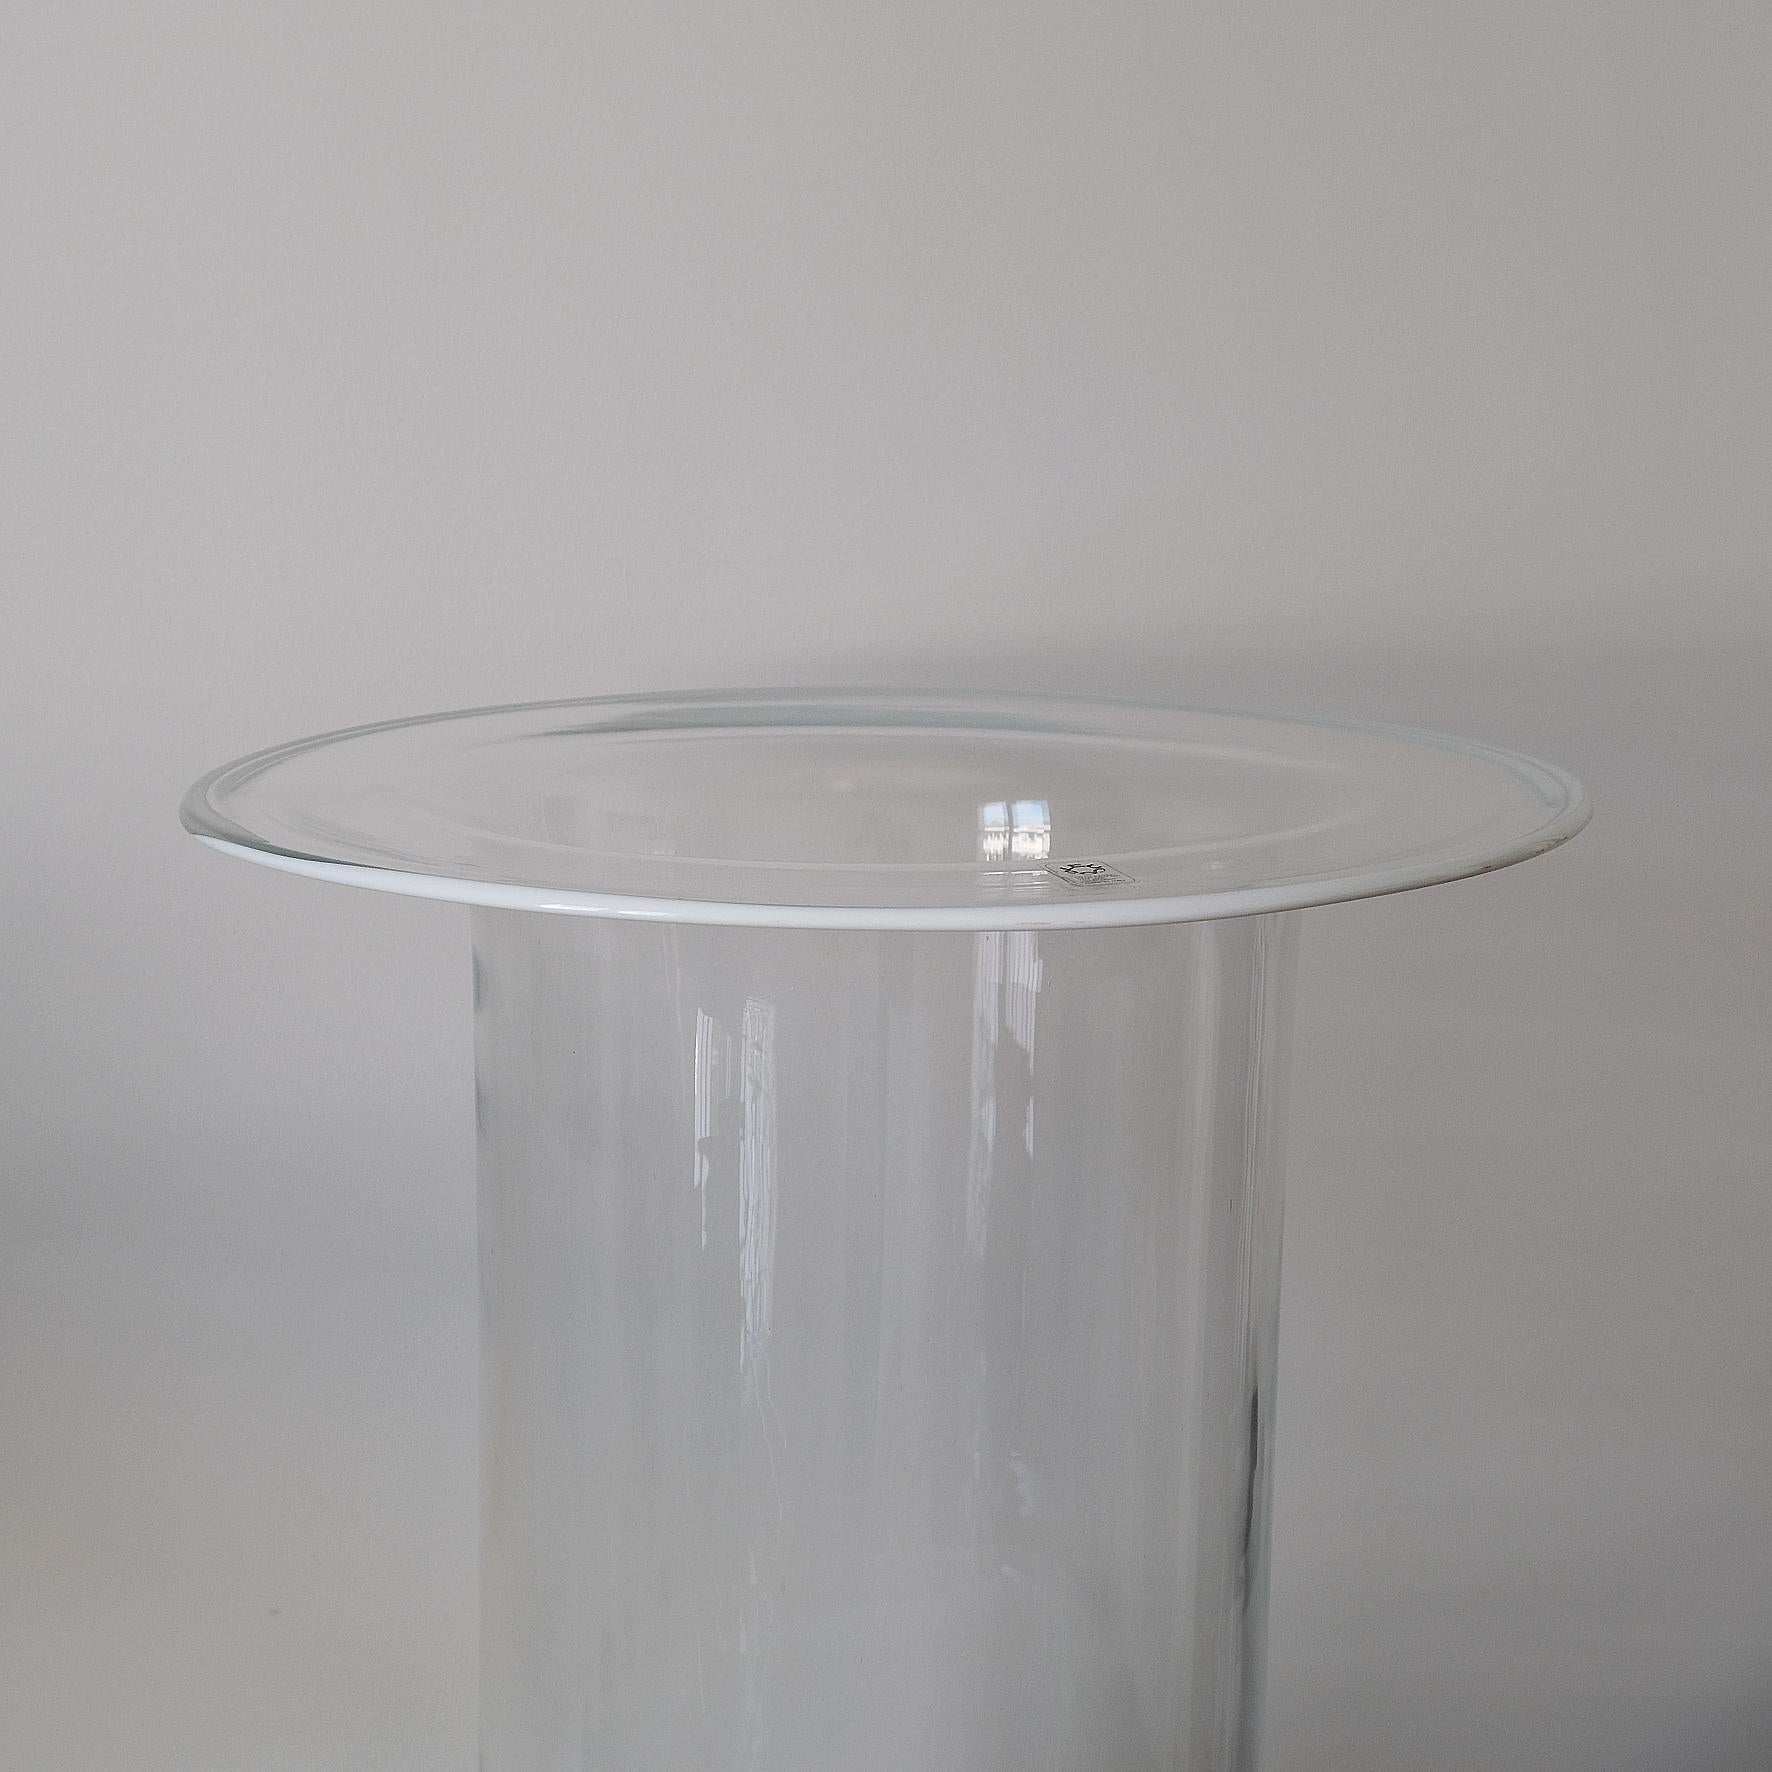 Italian Renato Toso, Chiclos, Cylindrical Glass Vase, Leucos, Italy, 60s For Sale